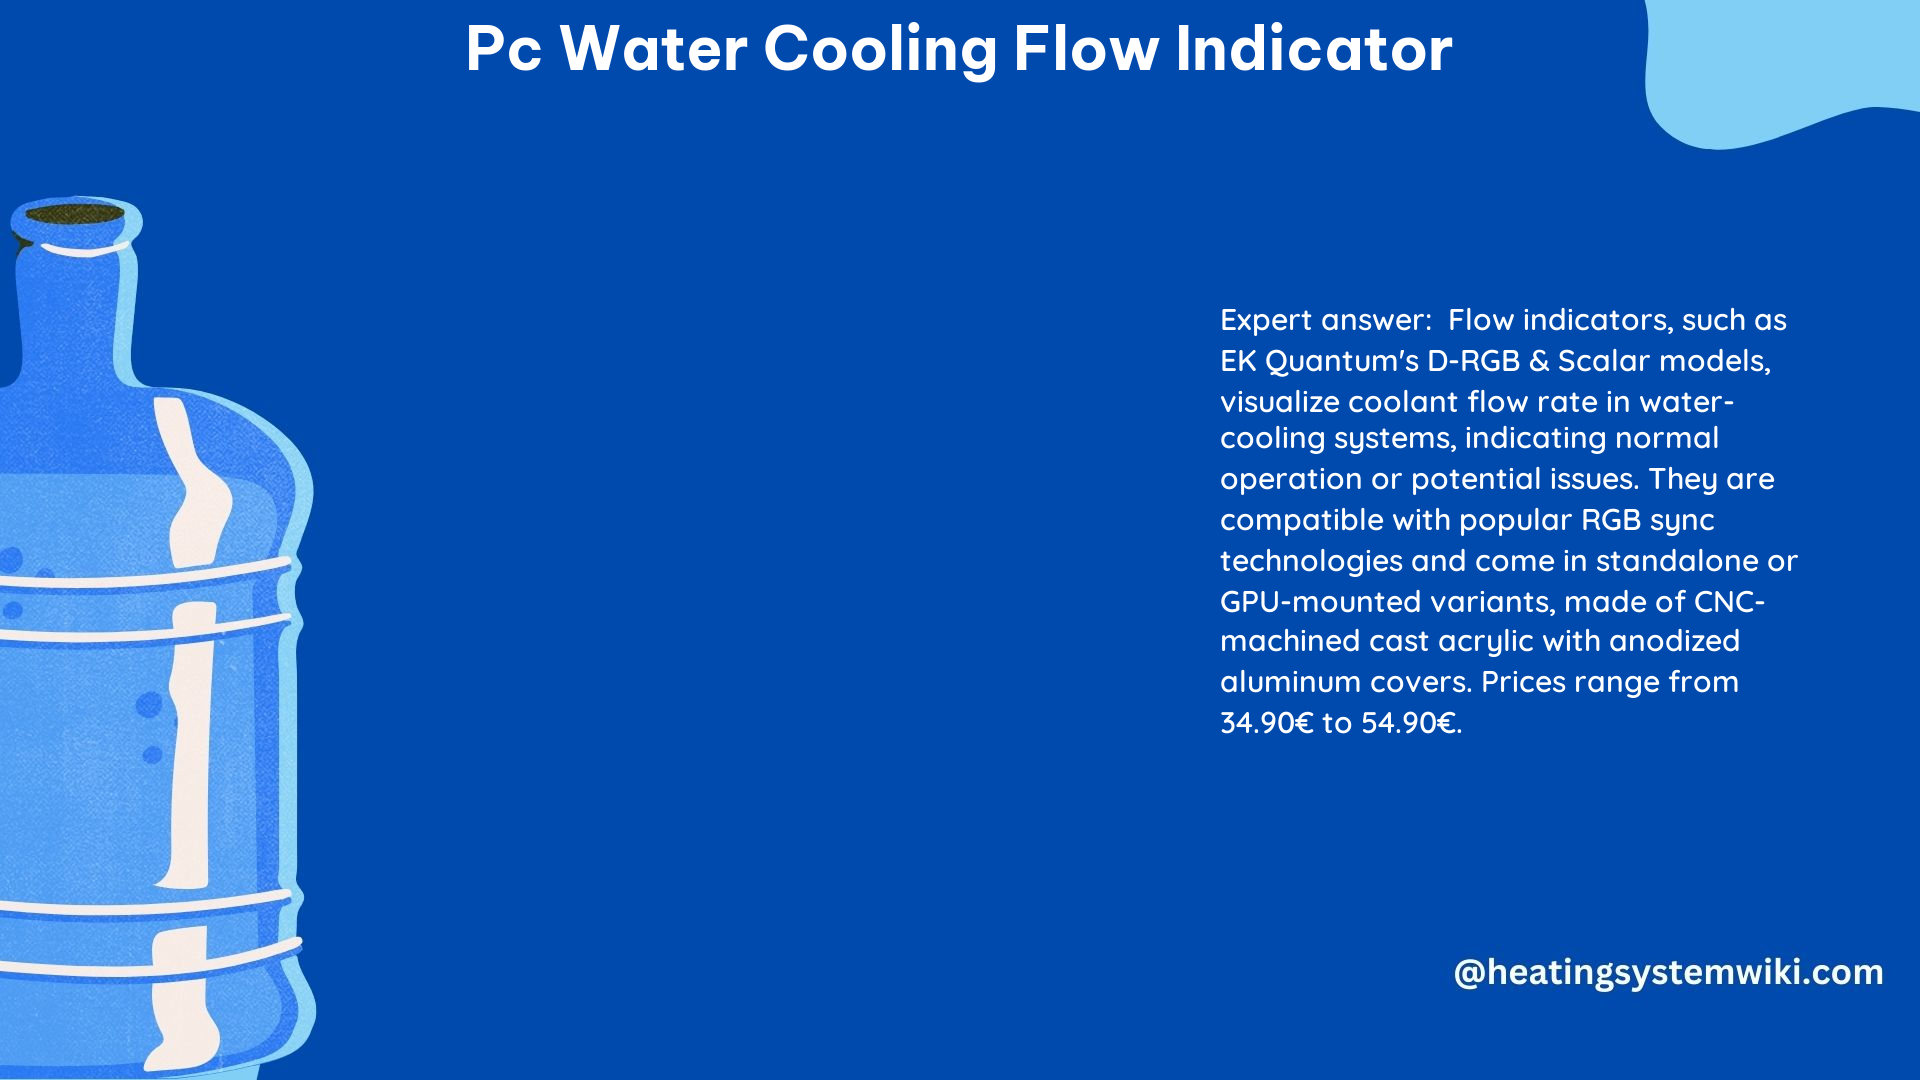 PC Water Cooling Flow Indicator